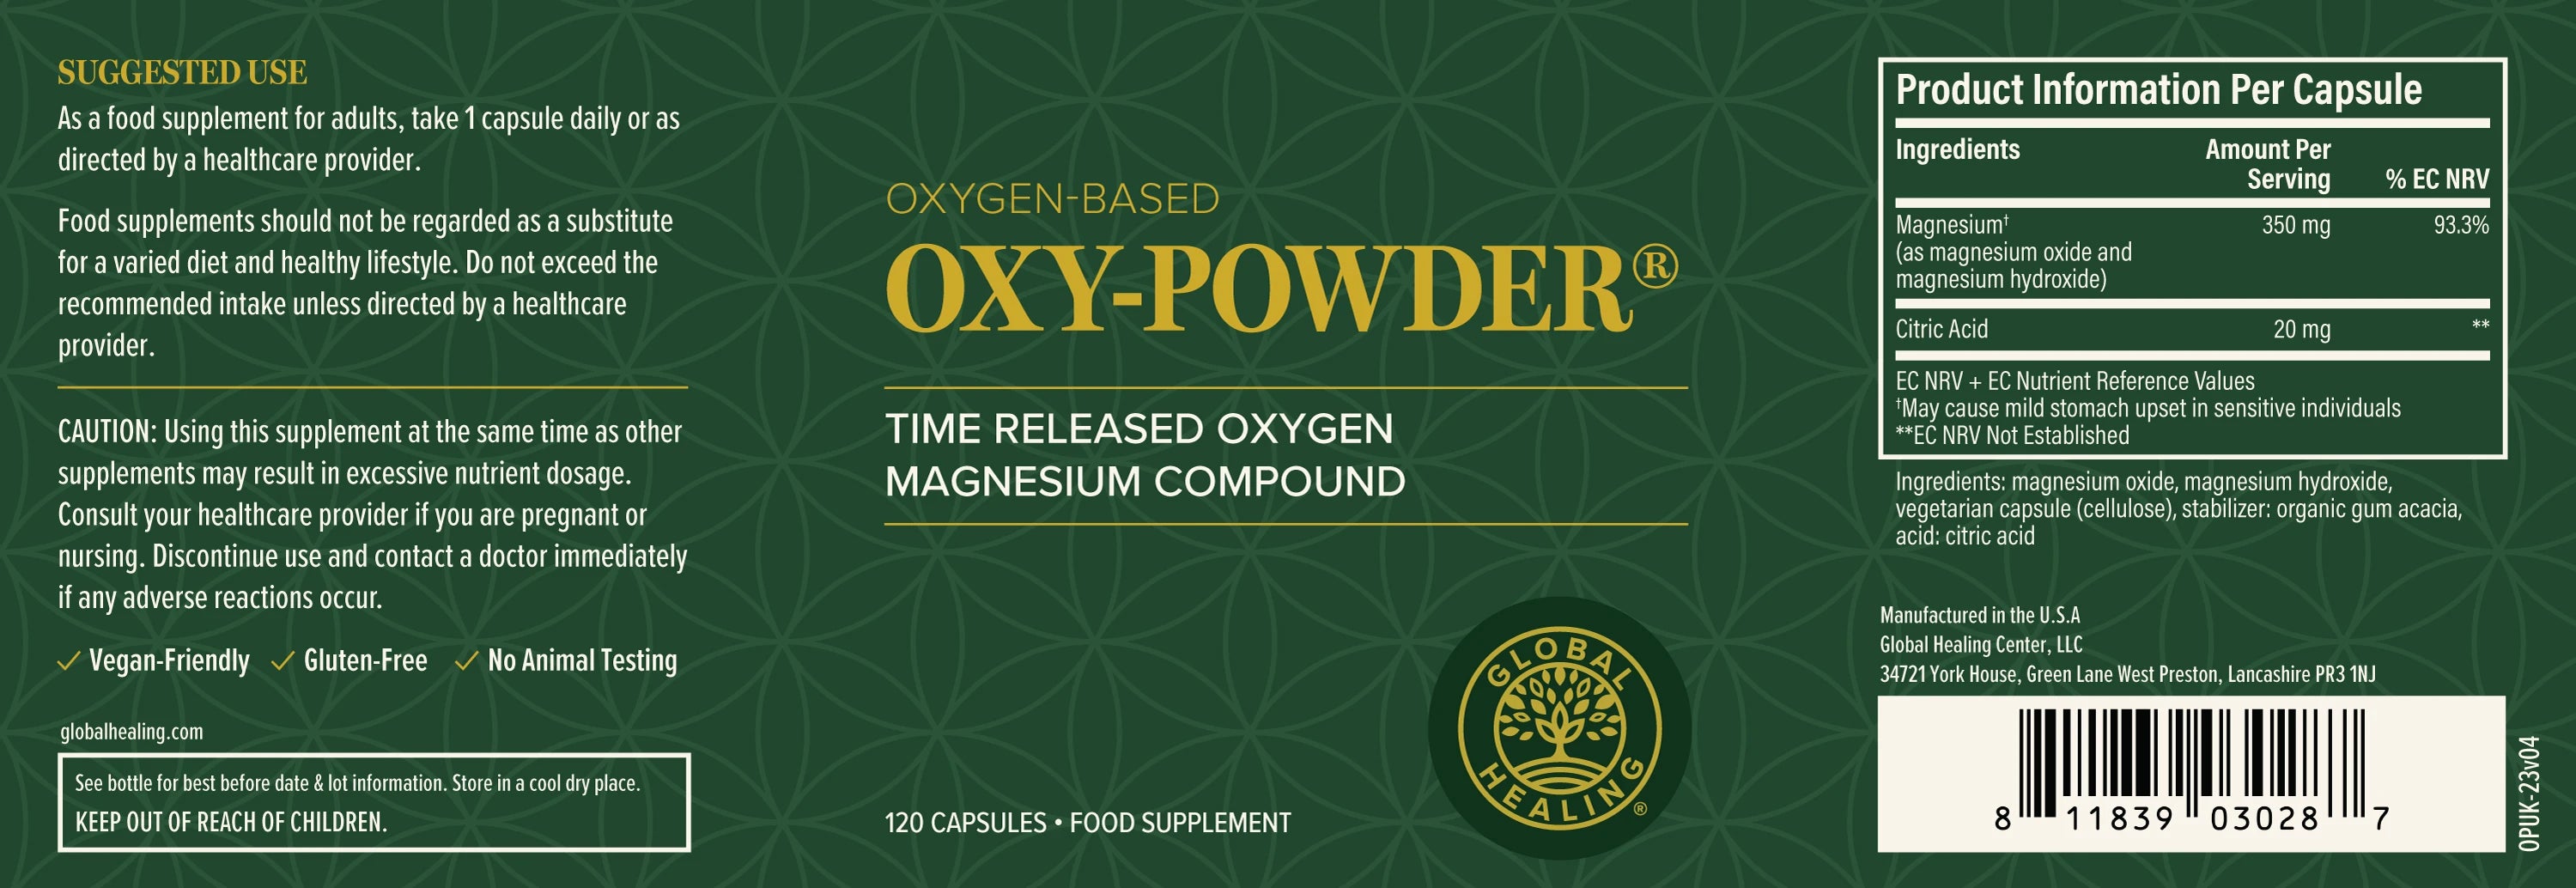 Global Healing Oxy-powder 120 capsules UK Bottle Label Supplement Facts 